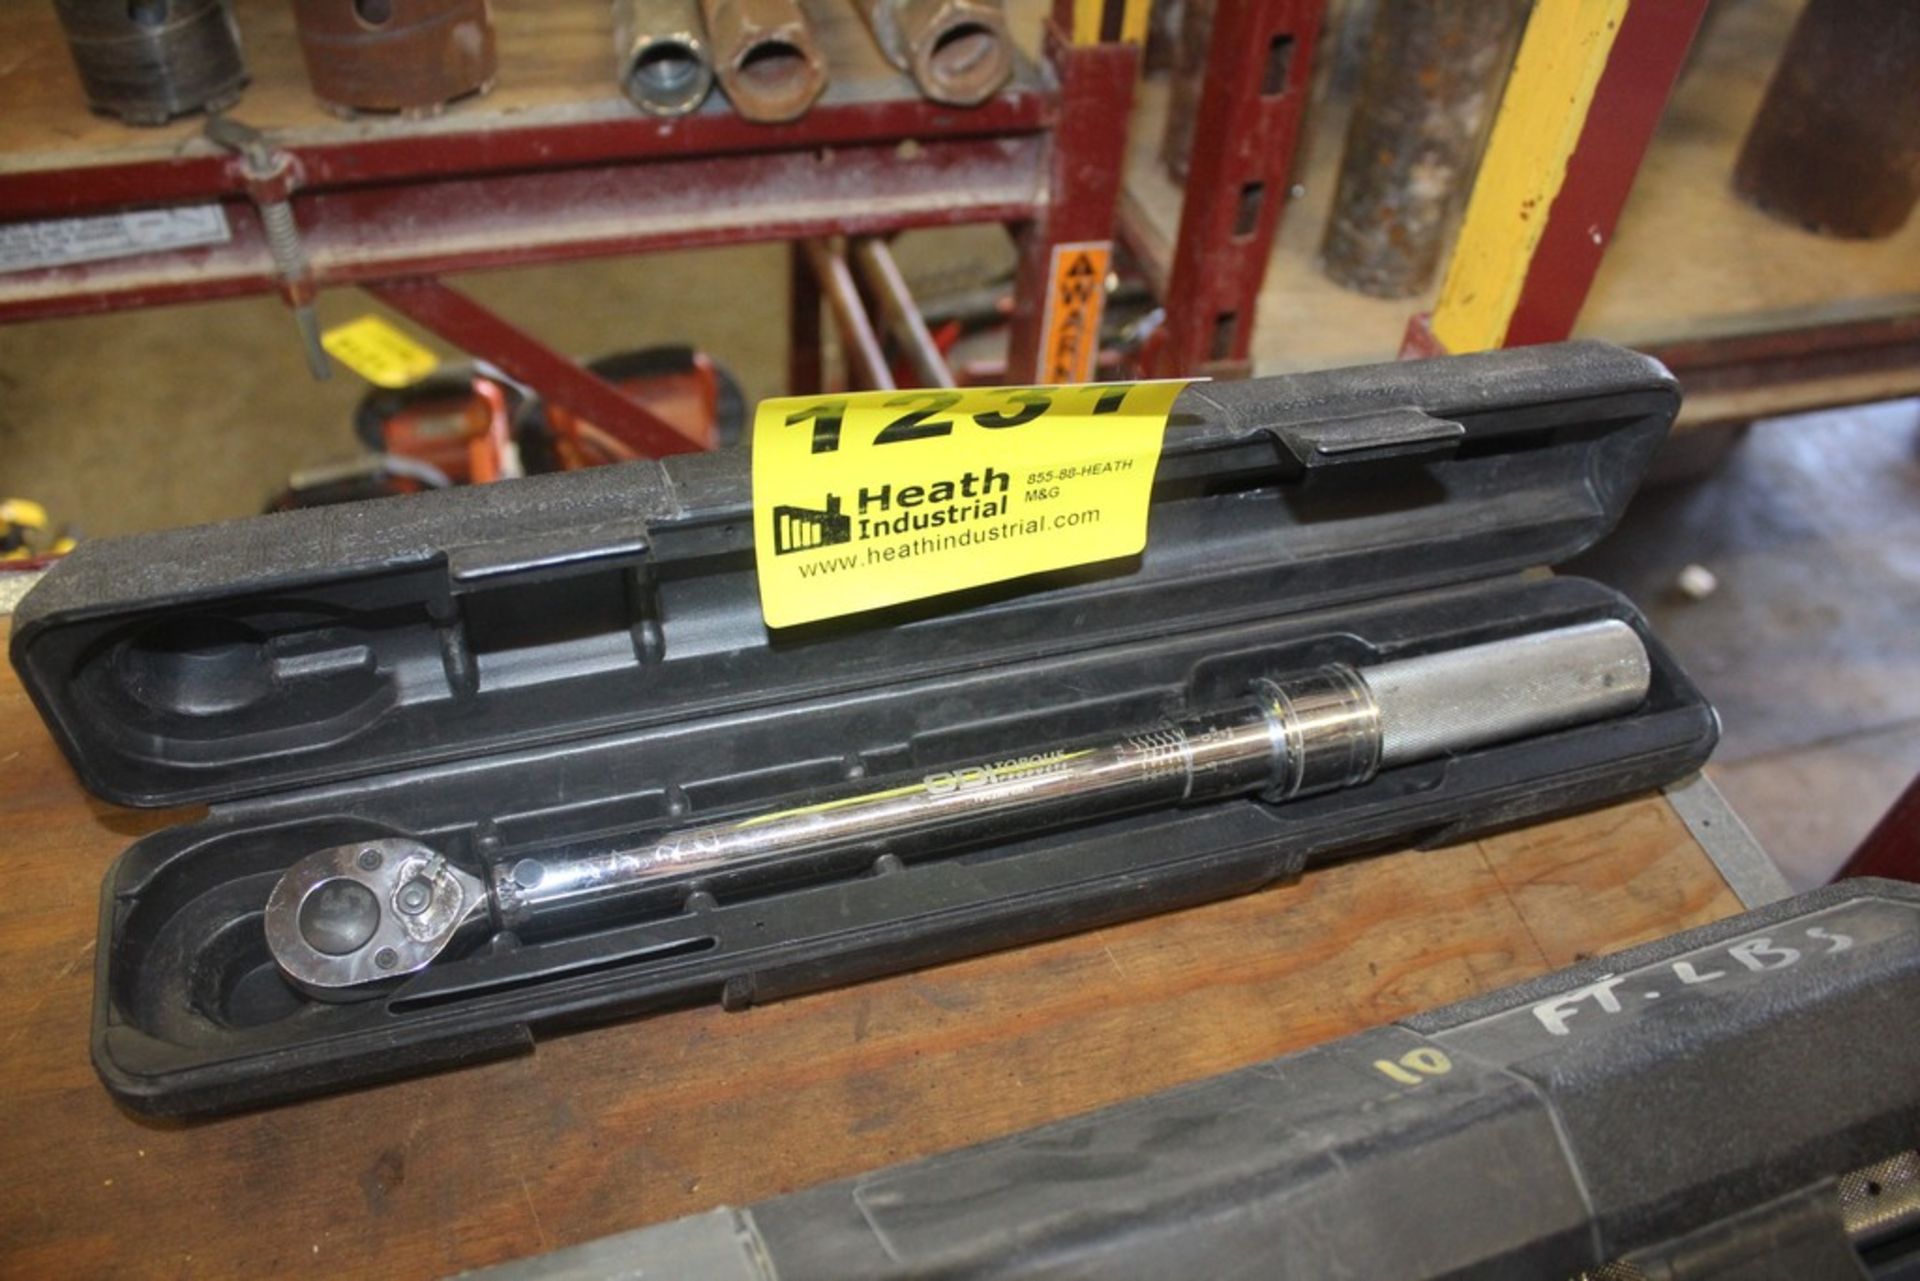 CDI 100FT/LB 3/8" TORQUE WRENCH WITH CASE